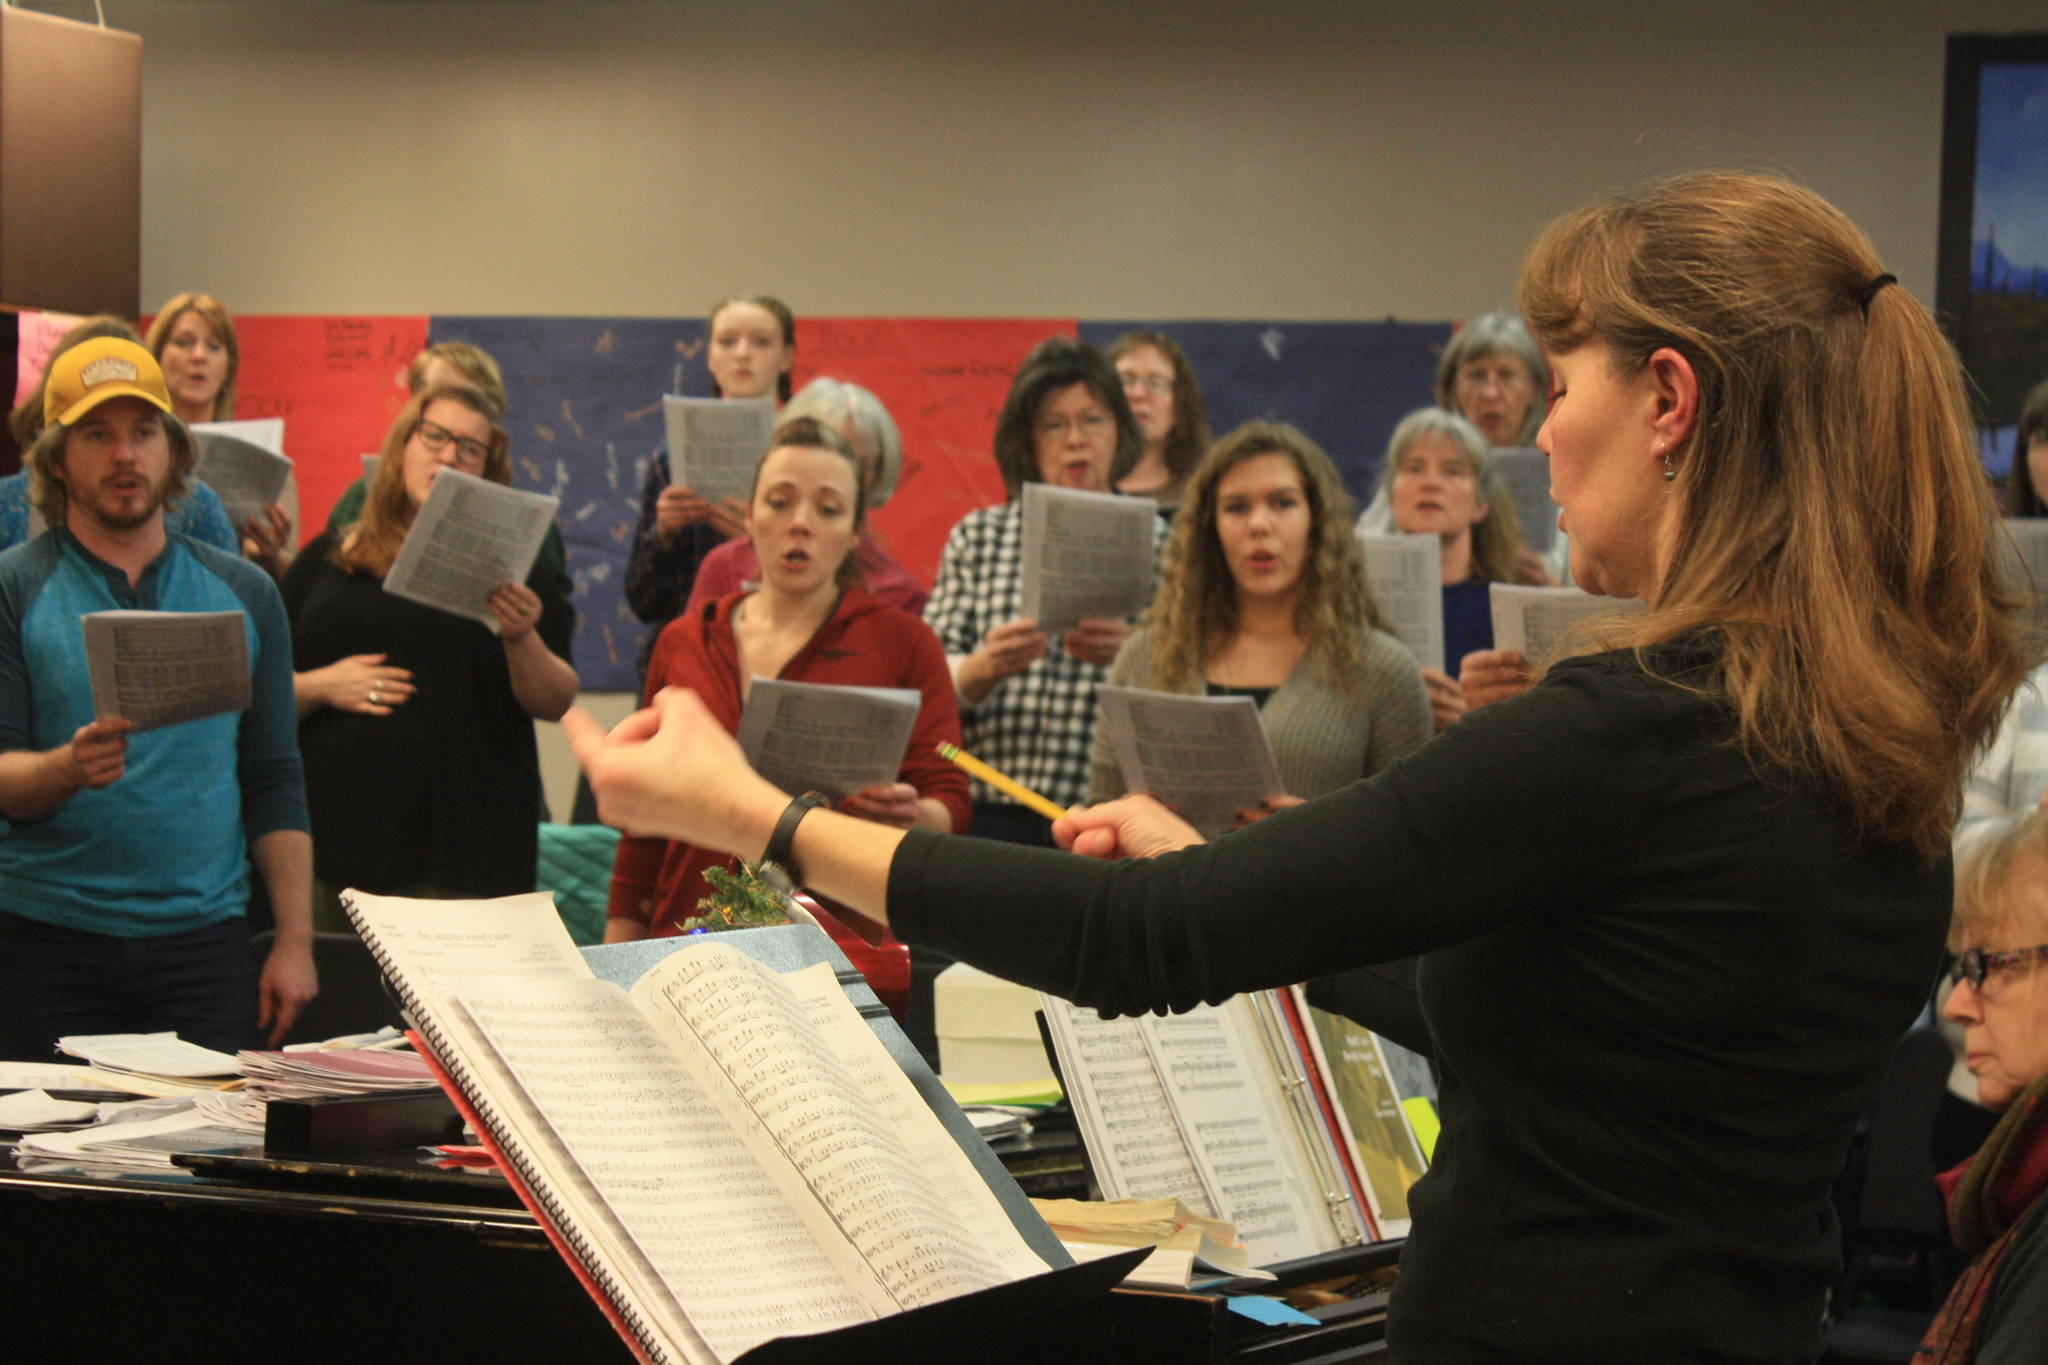 Redoubt Chamber Orchestra Conductor Tammy Vollom-Matturro leads the Kenai Peninsula Singers during a rehearsal on Dec. 11, 2017. The choir and orchestra will perform together in the 2019 Evening of Christmas on Friday, Dec. 15. (Photo by Erin Thompson/Peninsula Clarion)